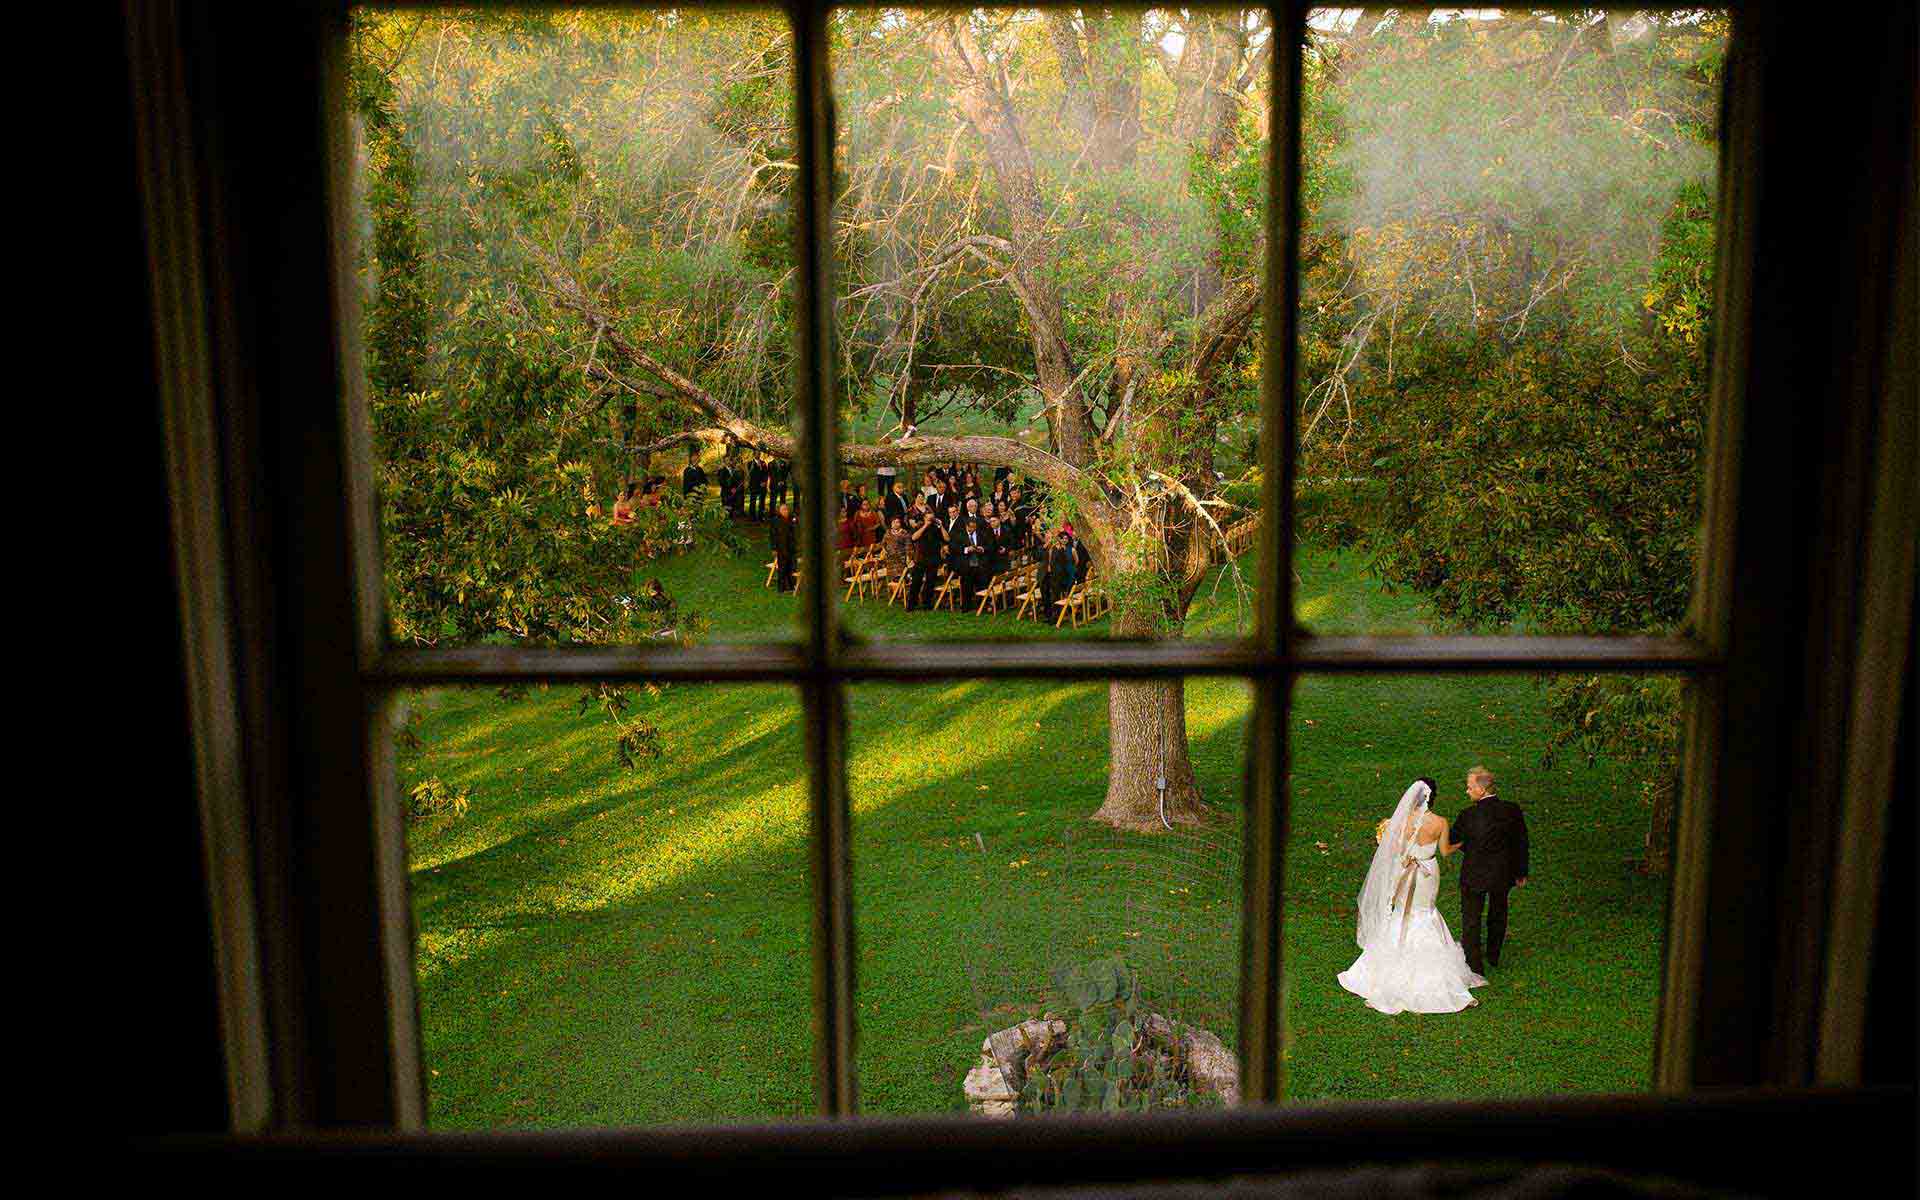 Shot-through-a-window-at-Don-Strange-Ranch-Texas-as-bride-walks-down-the-asile-with-her-father--photographed-by San Antonio wedding photographer Philip-Thomas